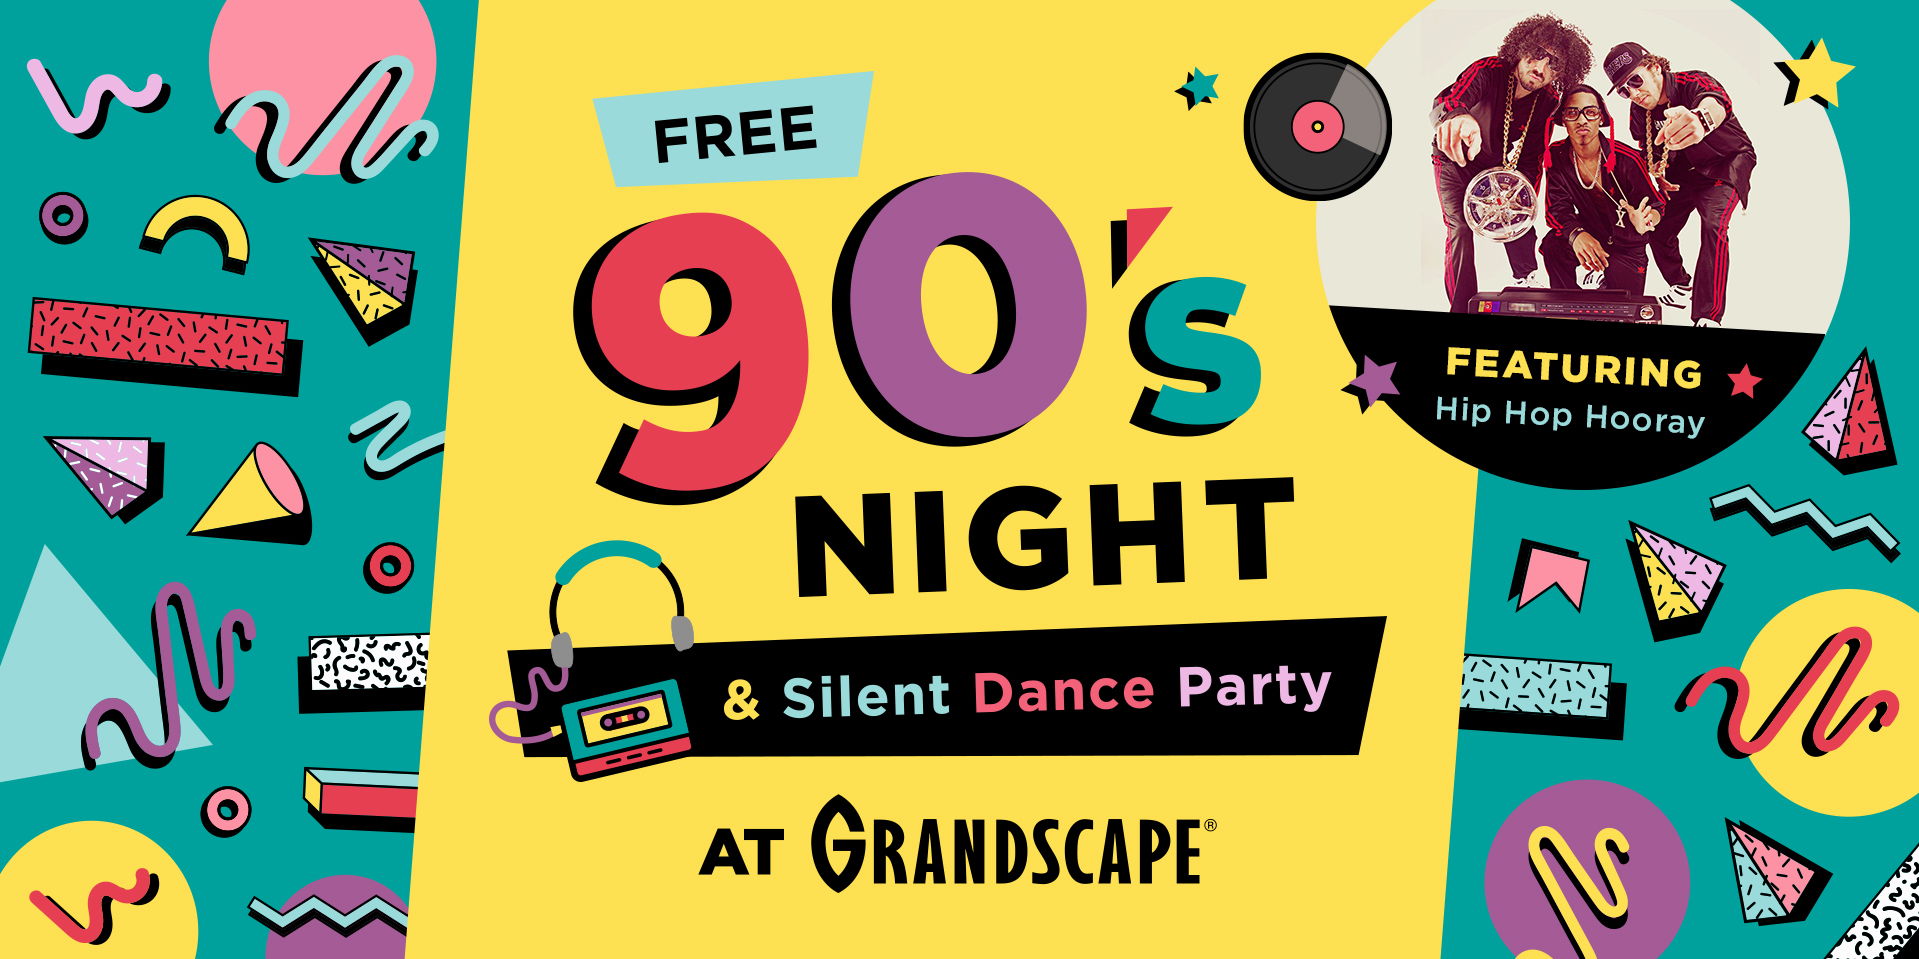 90's Night& Silent Dance Party promotional image